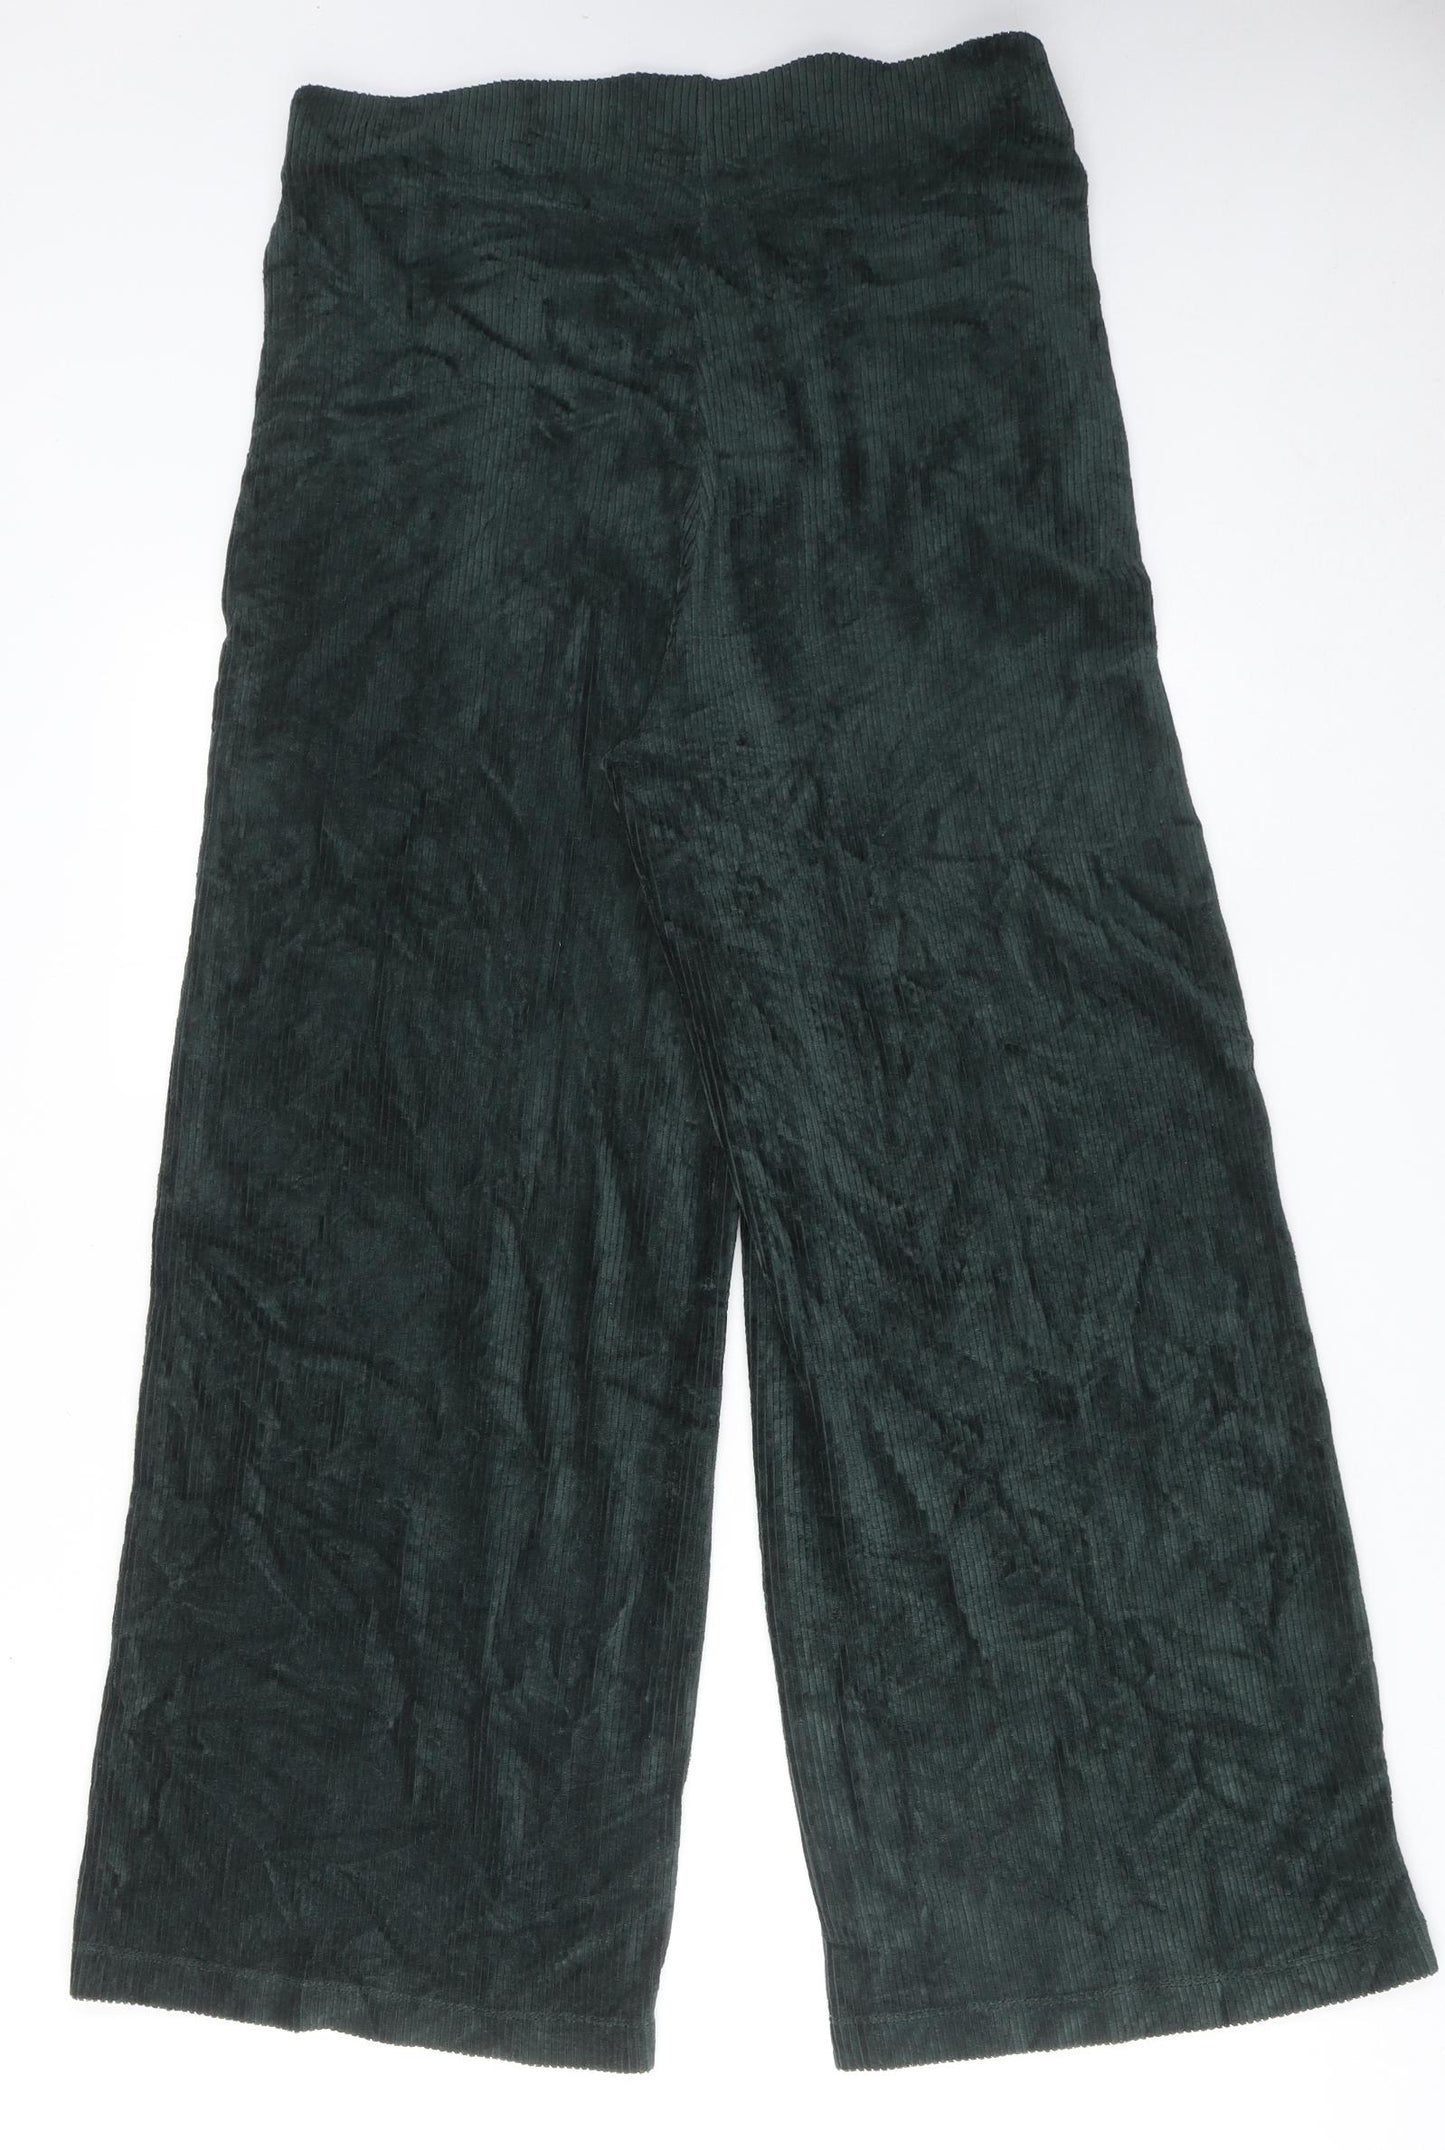 Marks and Spencer Womens Green Cotton Trousers Size 16 Regular